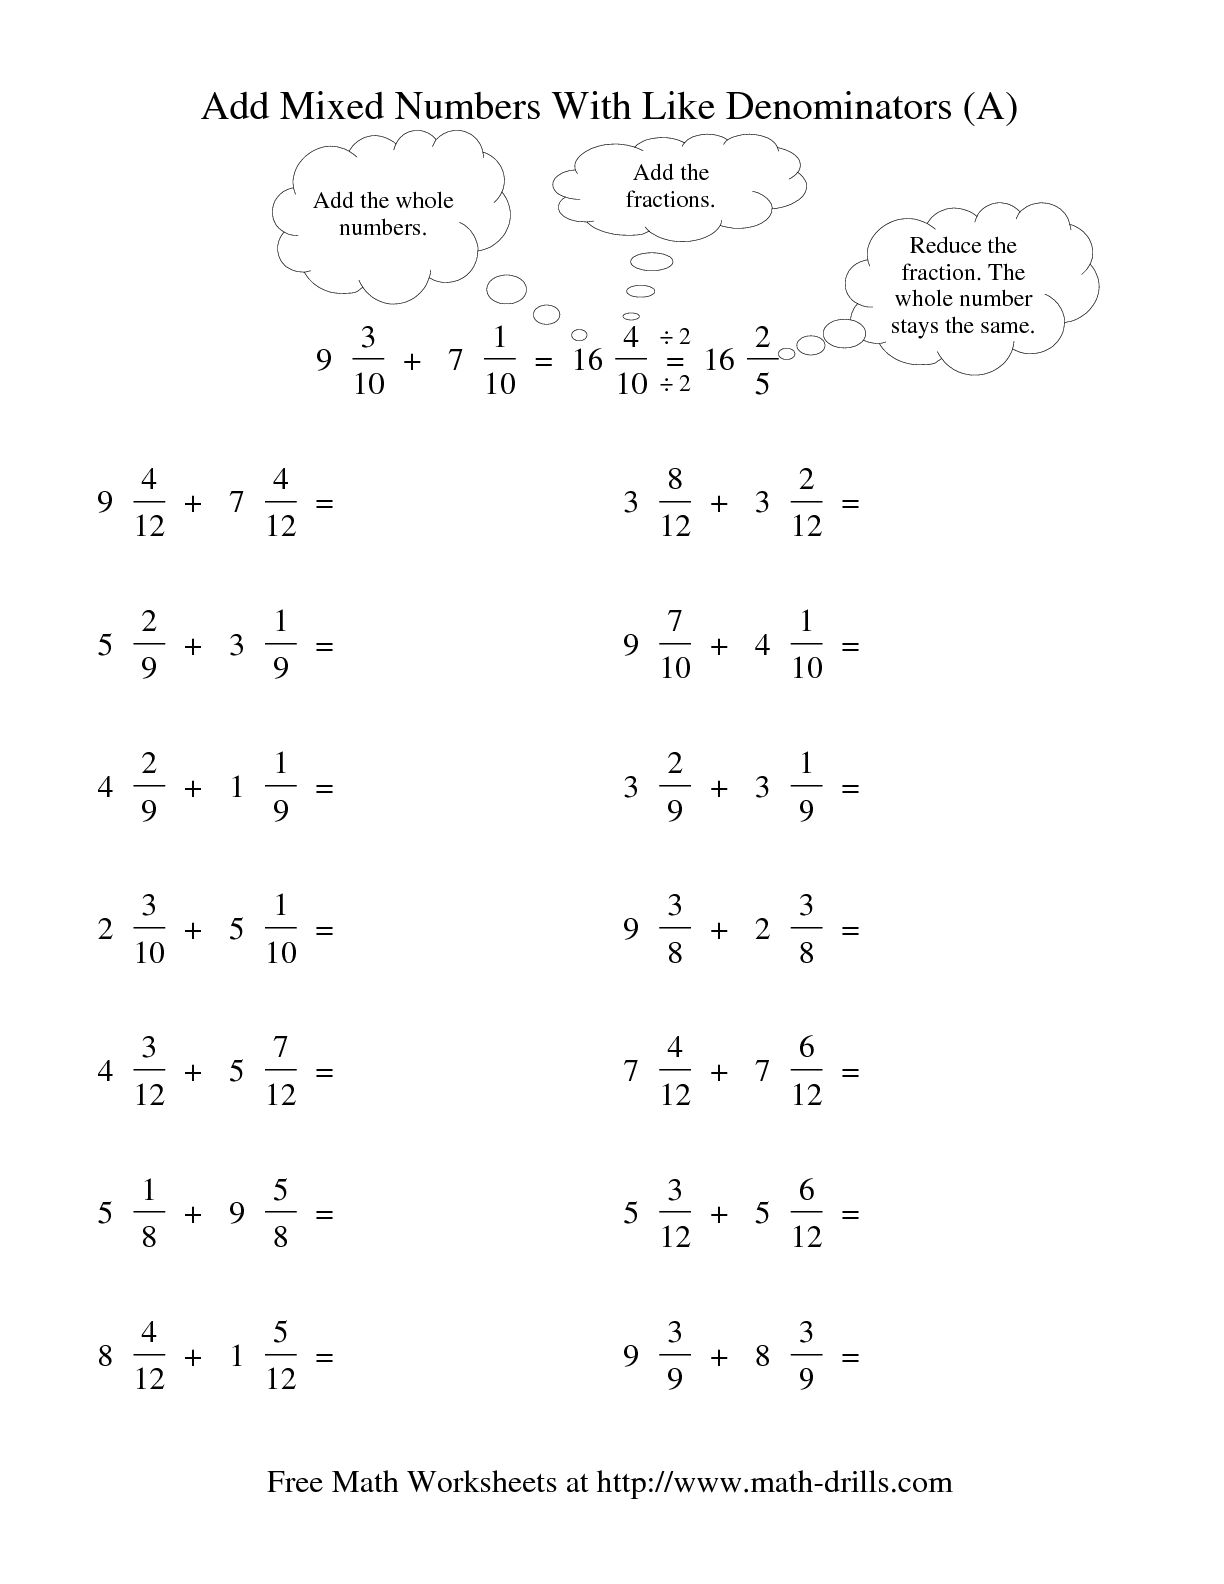 Adding Mixed Fractions with Like Denominators Worksheet